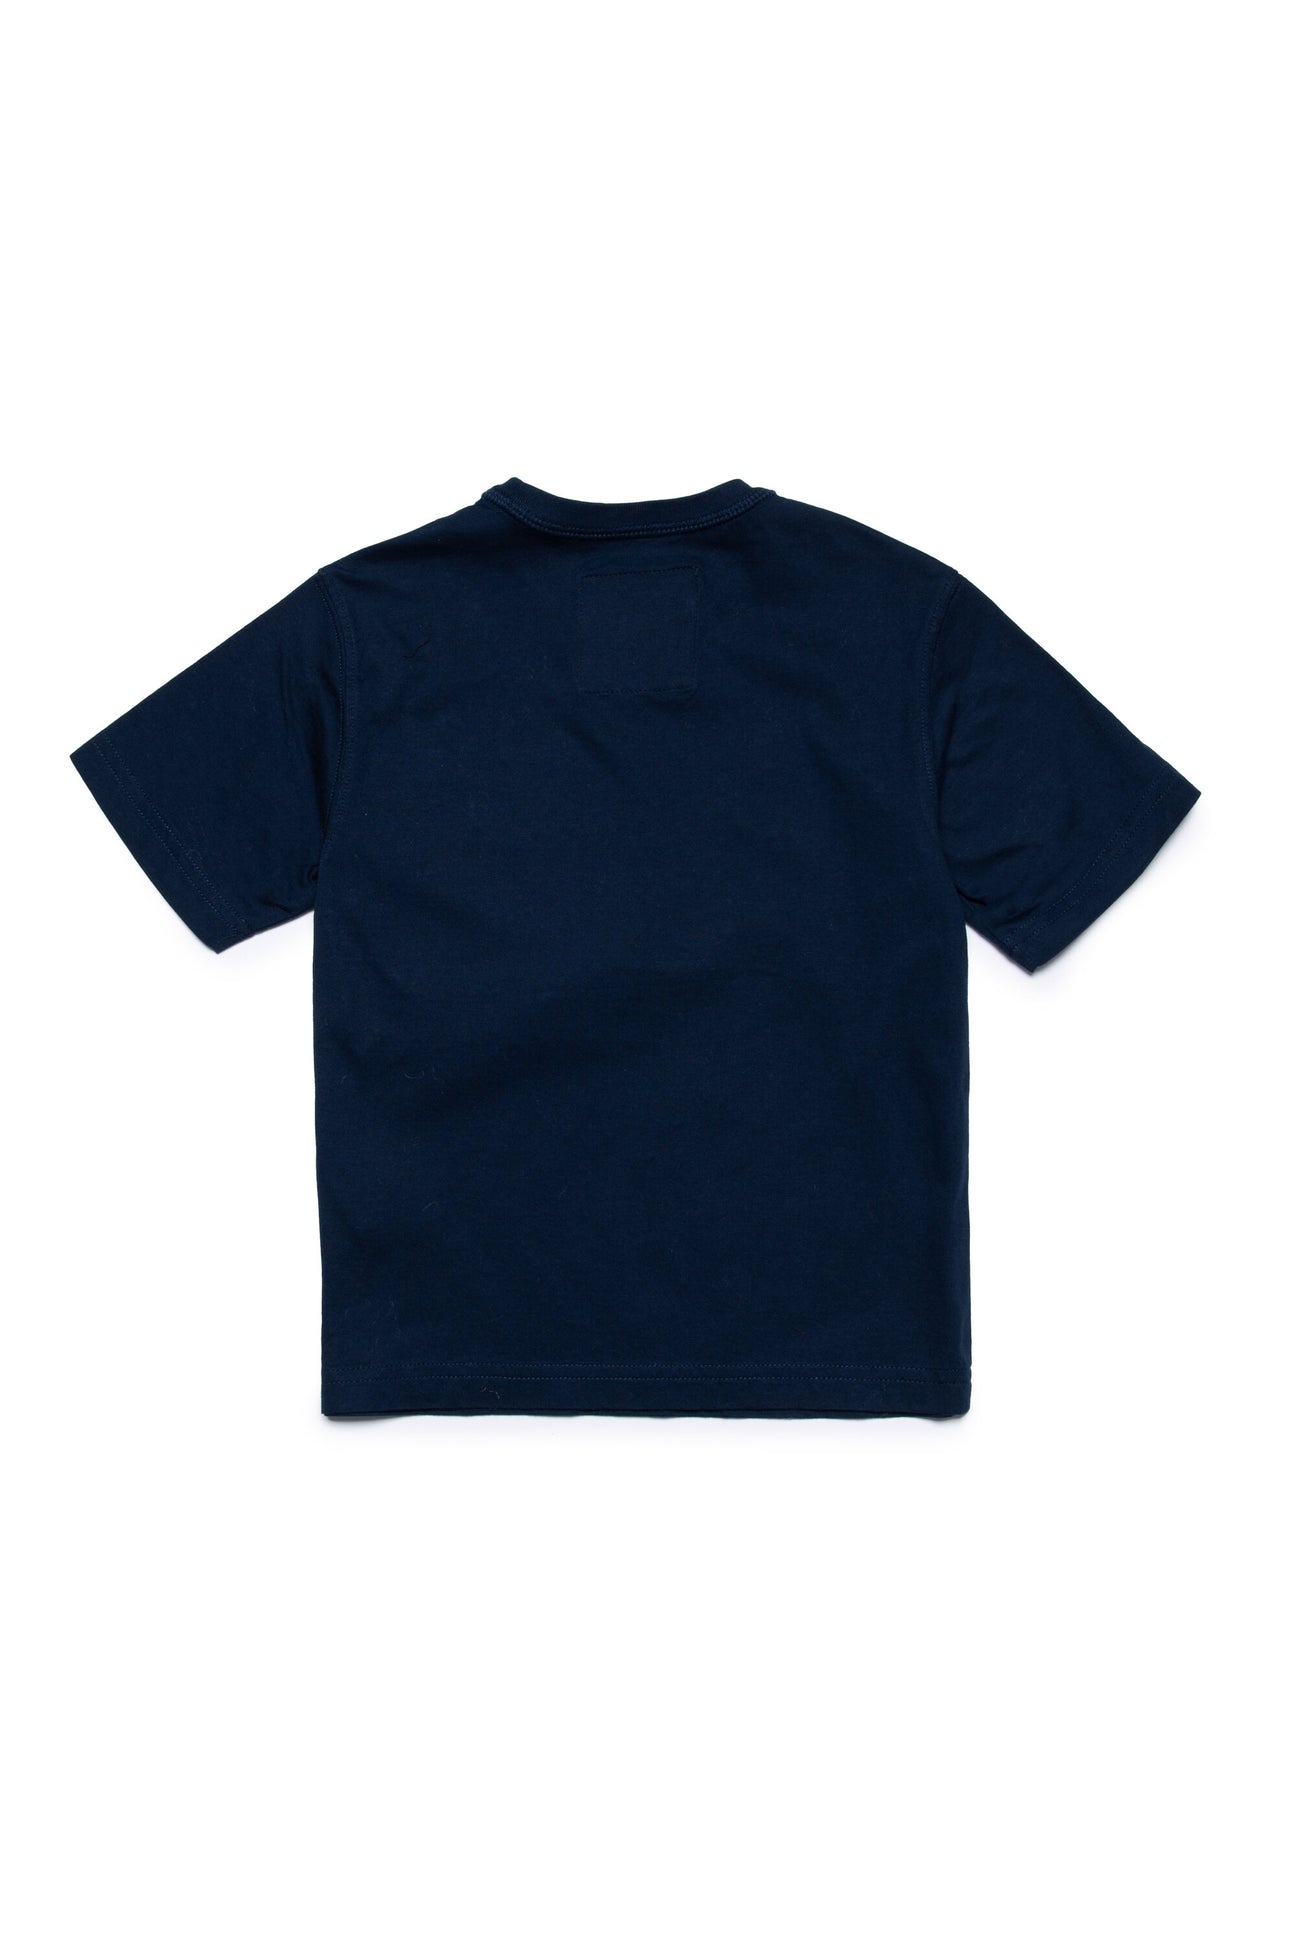 Deadstock fabric t-shirt with pocket application Deadstock fabric t-shirt with pocket application